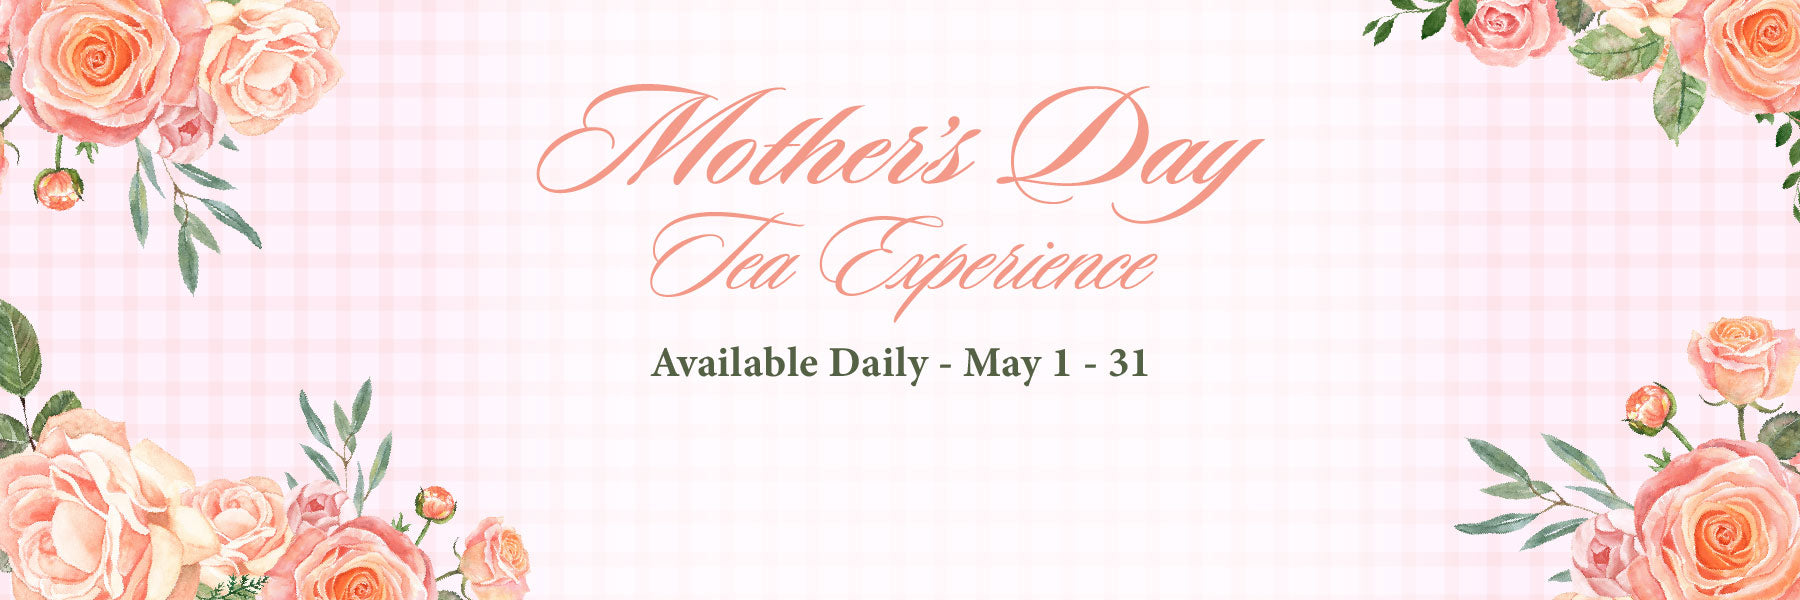 Mothers Day Tea Experience